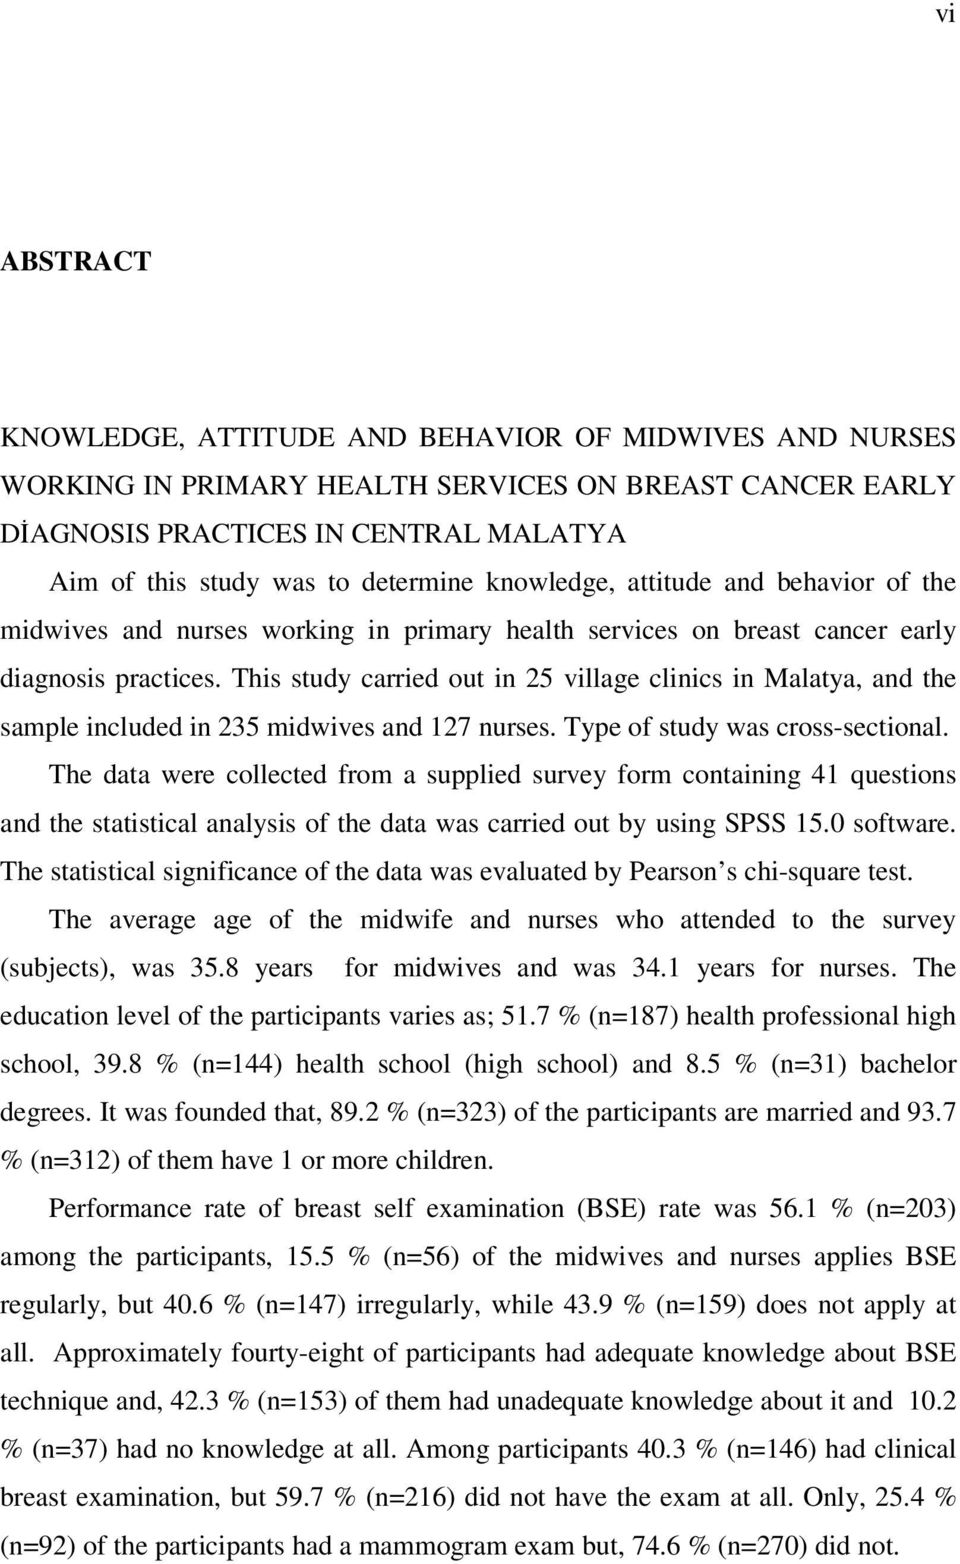 This study carried out in 25 village clinics in Malatya, and the sample included in 235 midwives and 127 nurses. Type of study was cross-sectional.